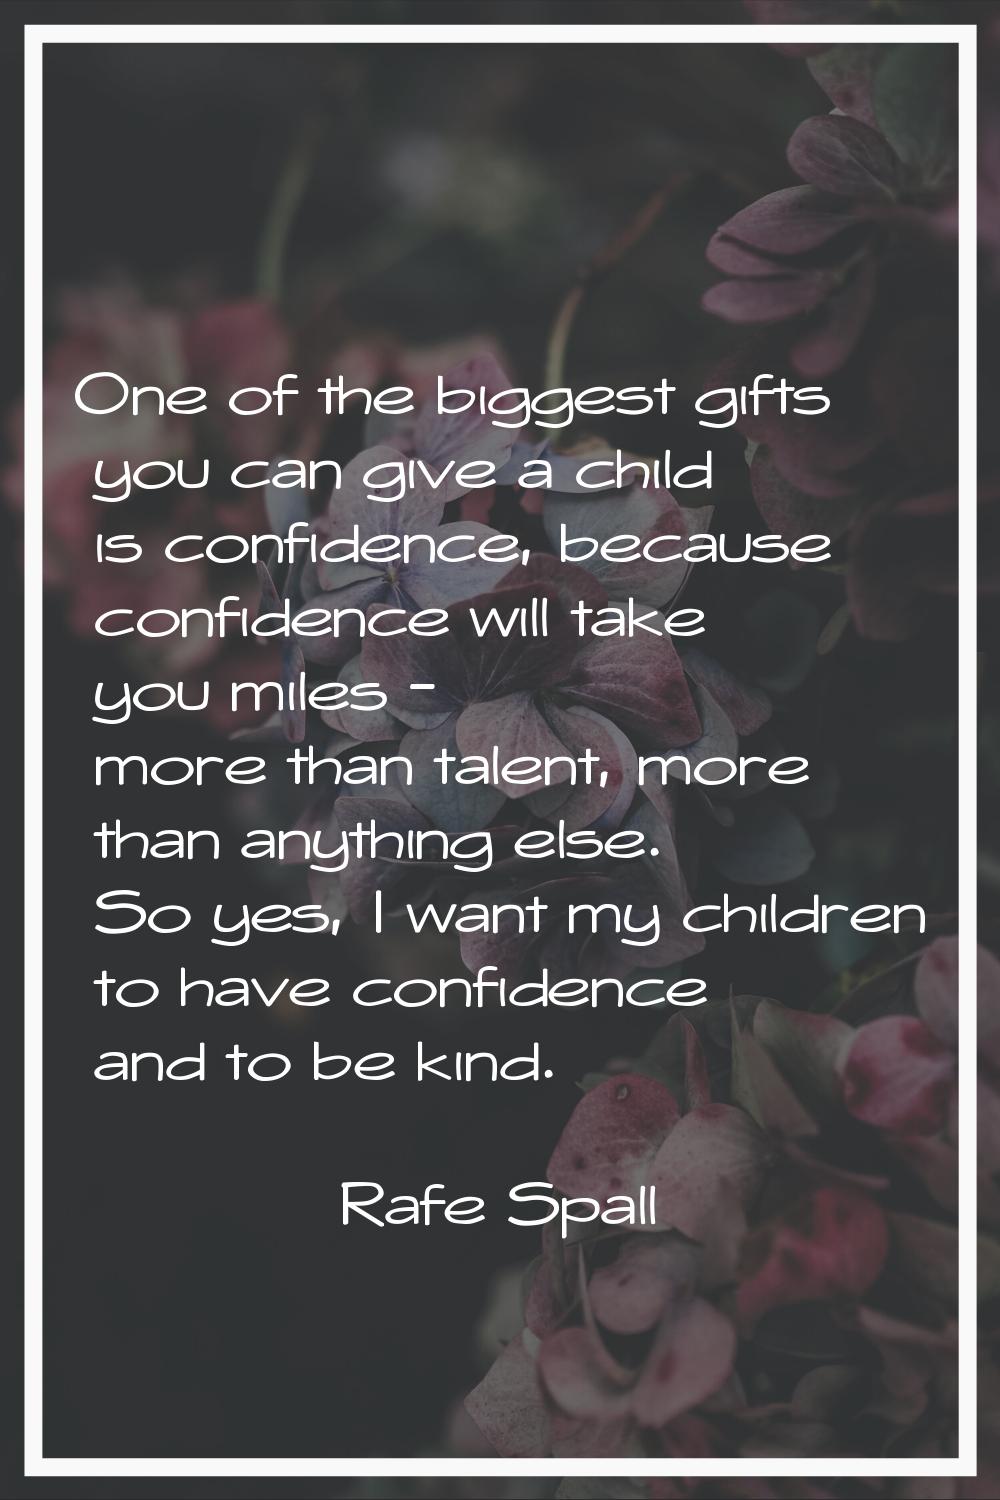 One of the biggest gifts you can give a child is confidence, because confidence will take you miles